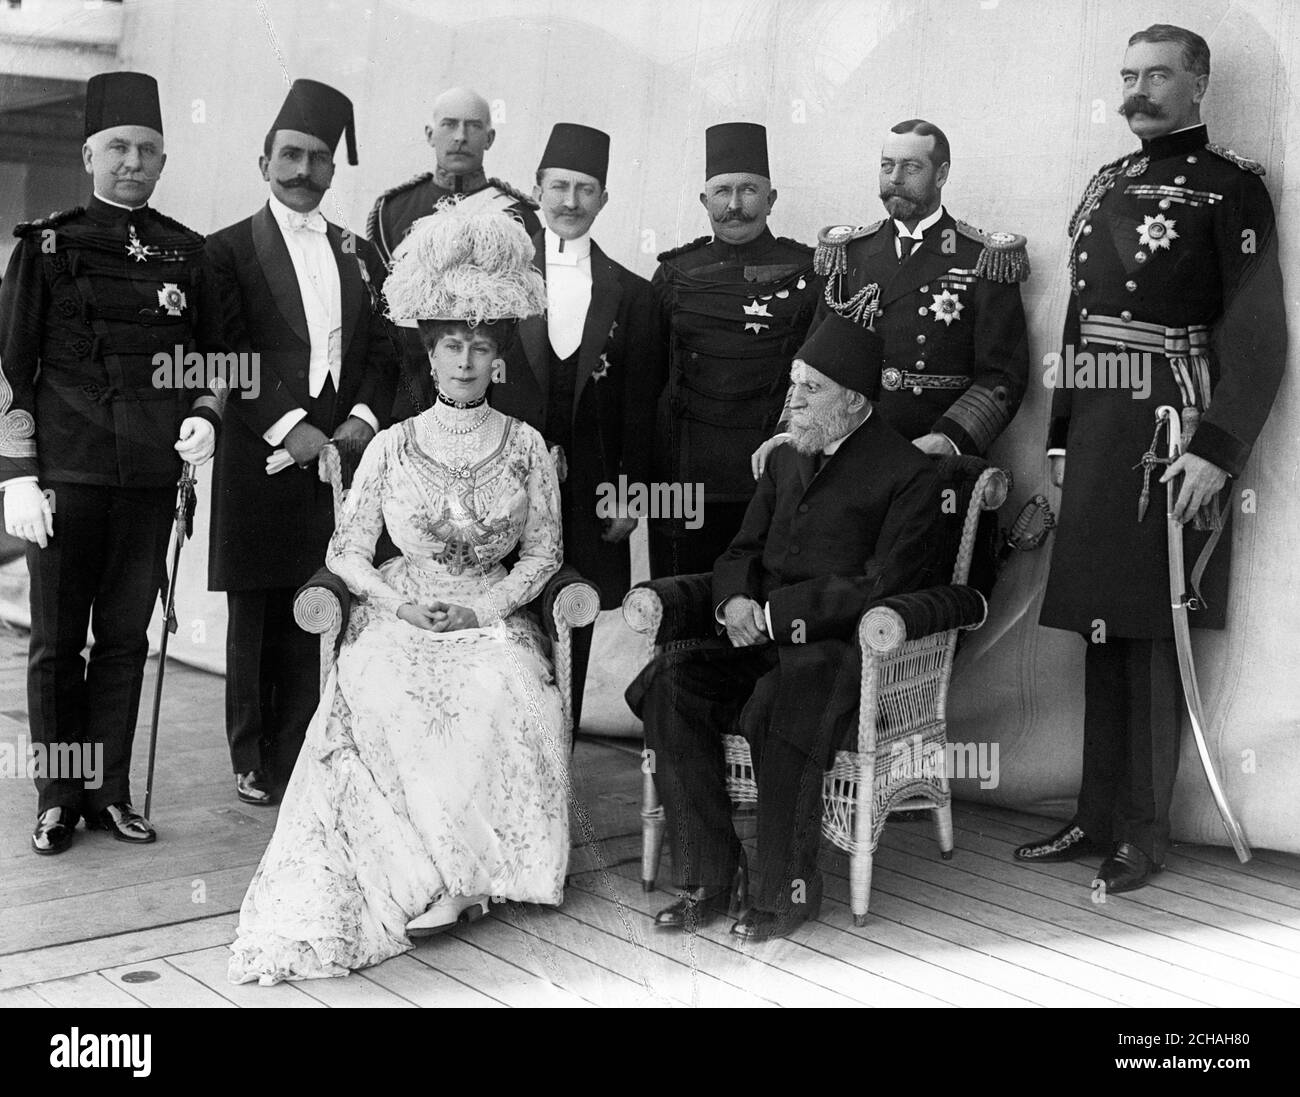 On board the 'Medina' outward journey. (Back row, l-r) General Sir Reginald Wingate (Sirdar of Egypt), H.H. Prince Muhammad Ali Pasha, the Duke of Teck, Prince Zia-ed-Din, the Khedive of Egypt, King George V and Lord Kitchener. (Front, l-r) Queen Mary and H.H. Kiamil Pasha ( Ex Grand Vizier of Turkey). Stock Photo